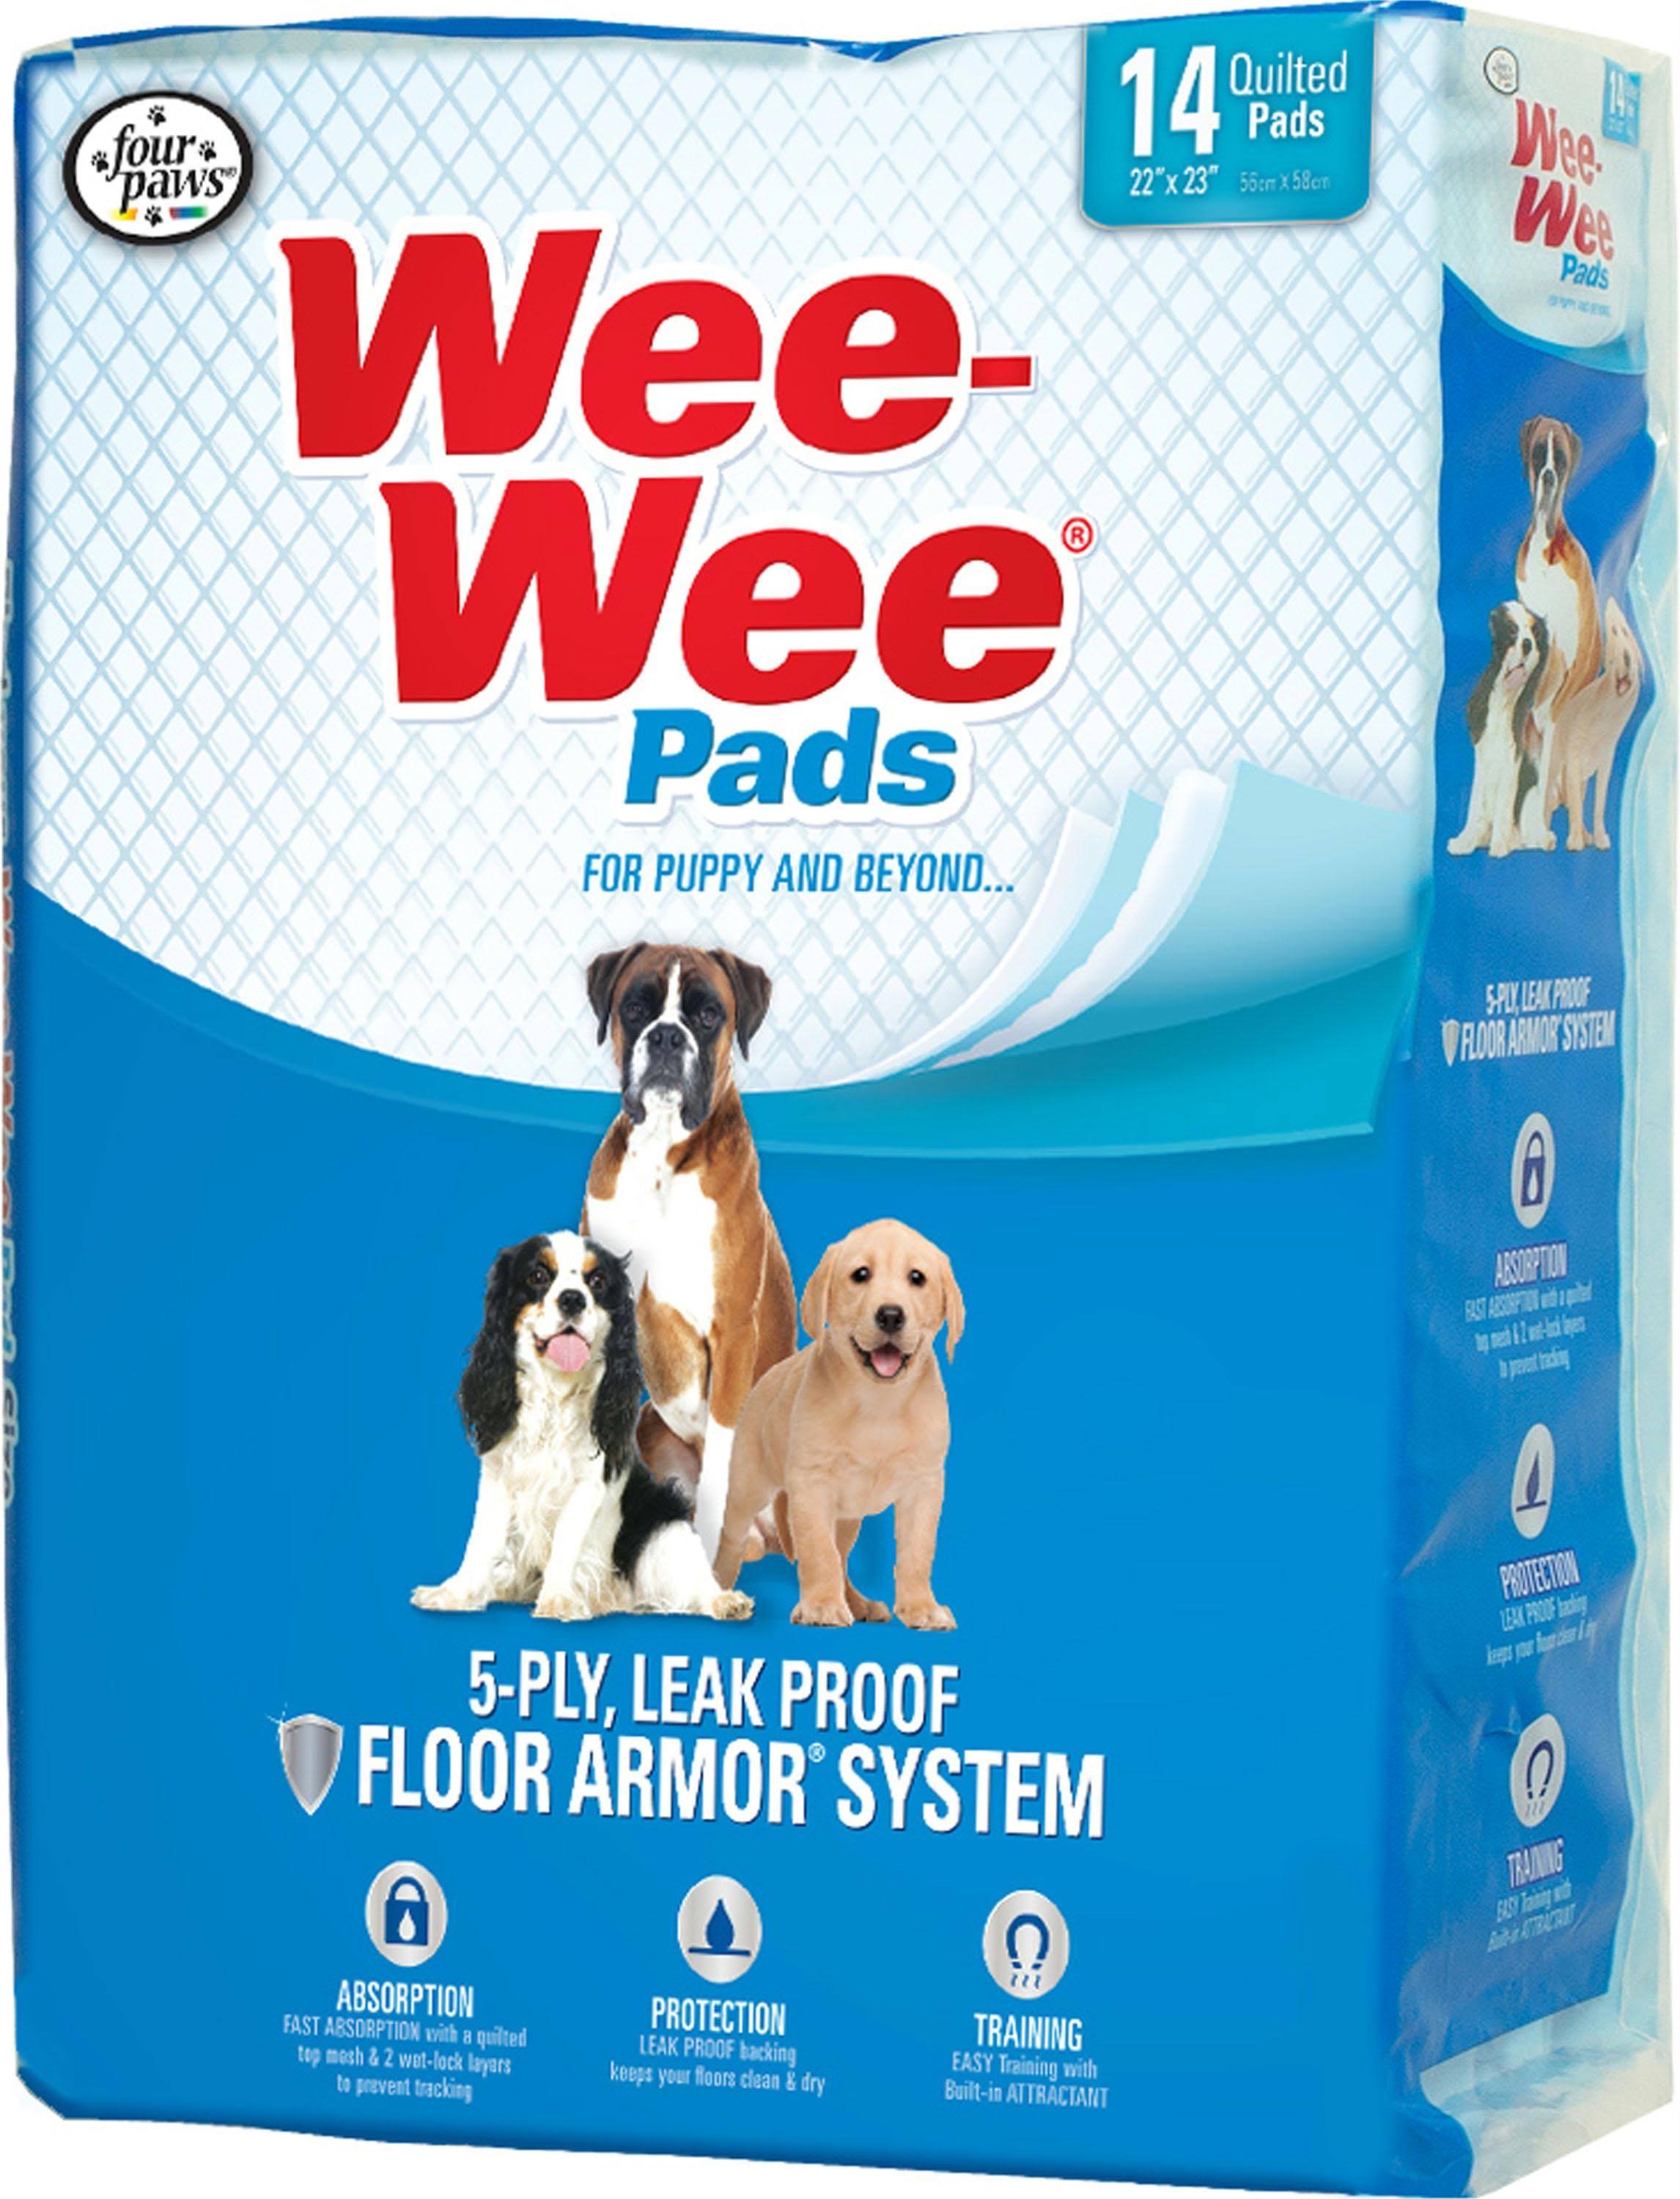 Four Paws Wee-Wee Dog Housebreaking Pads - Standard, 30 Pack